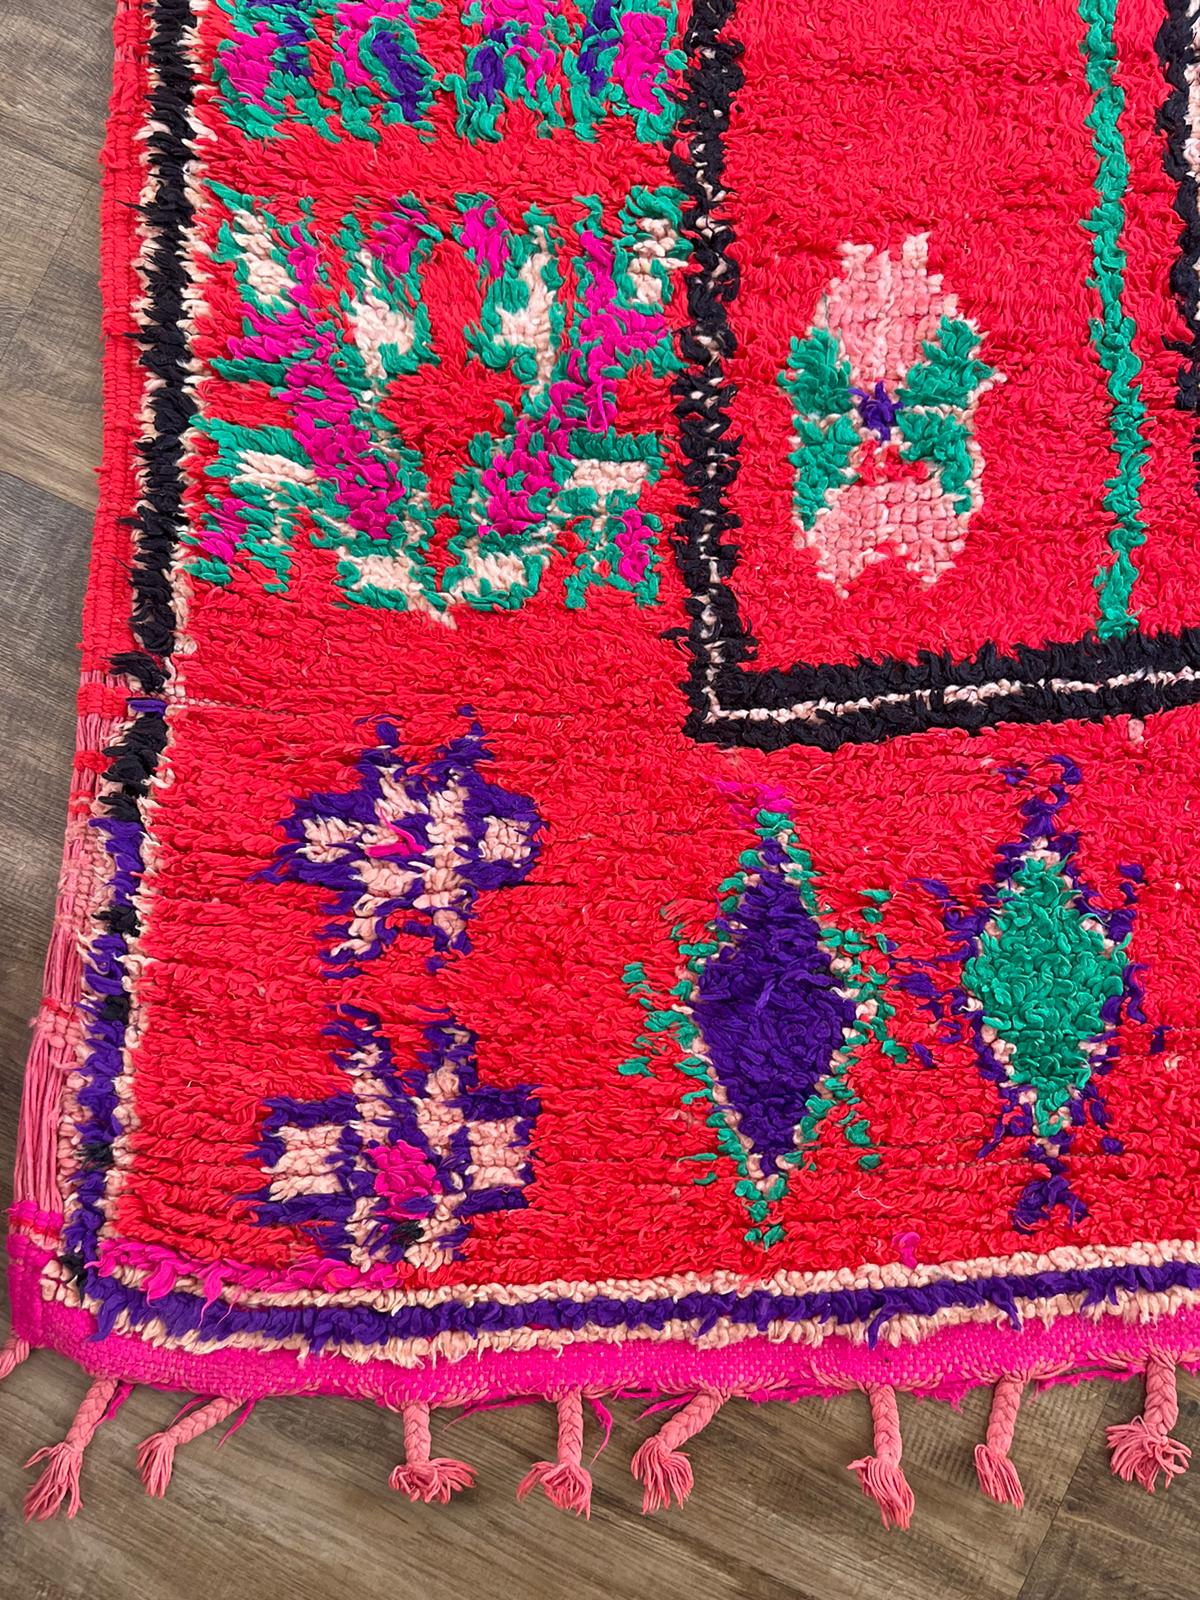 Vintage red Boujaad rug with green, blue and pink accents